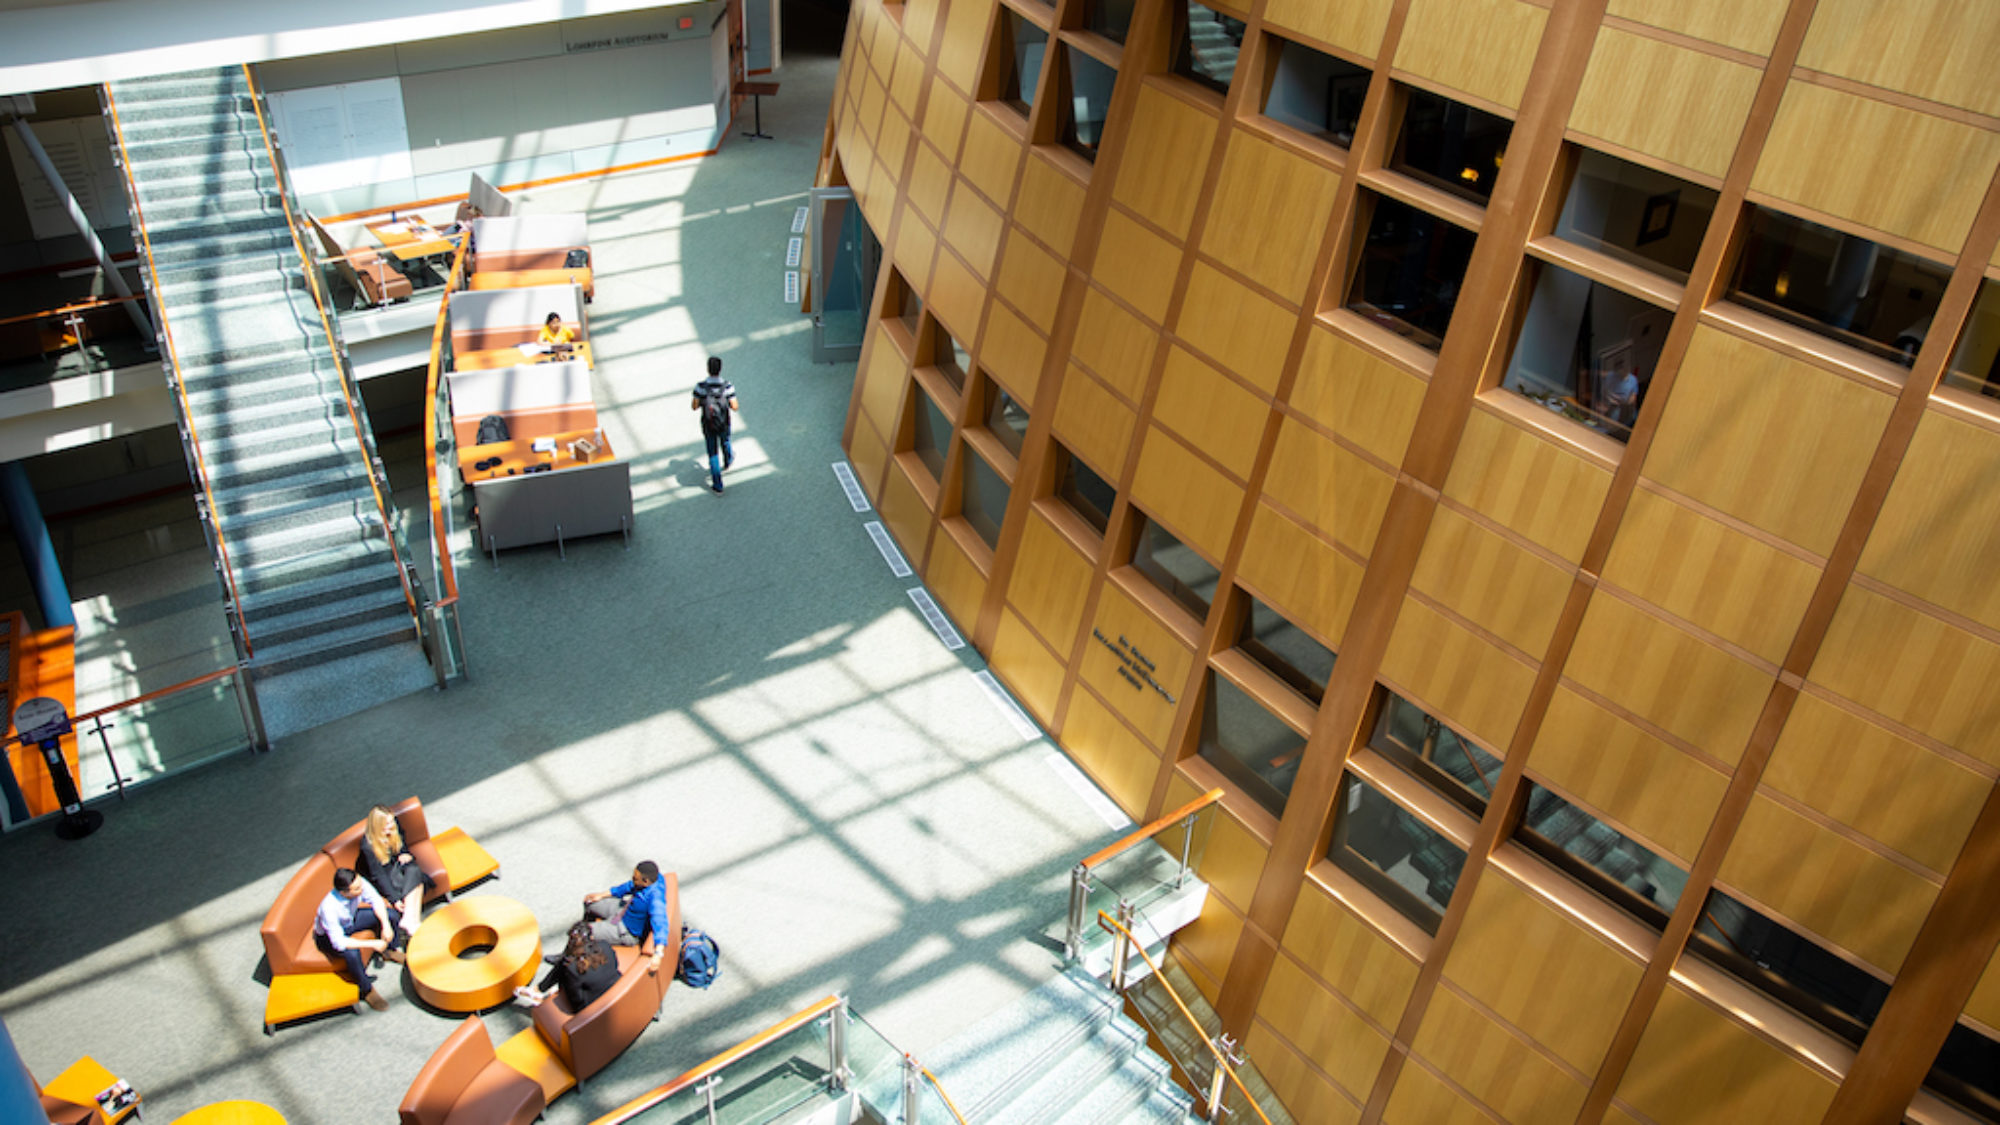 Image displays an aerial view of the inside of the McDonough School of Business